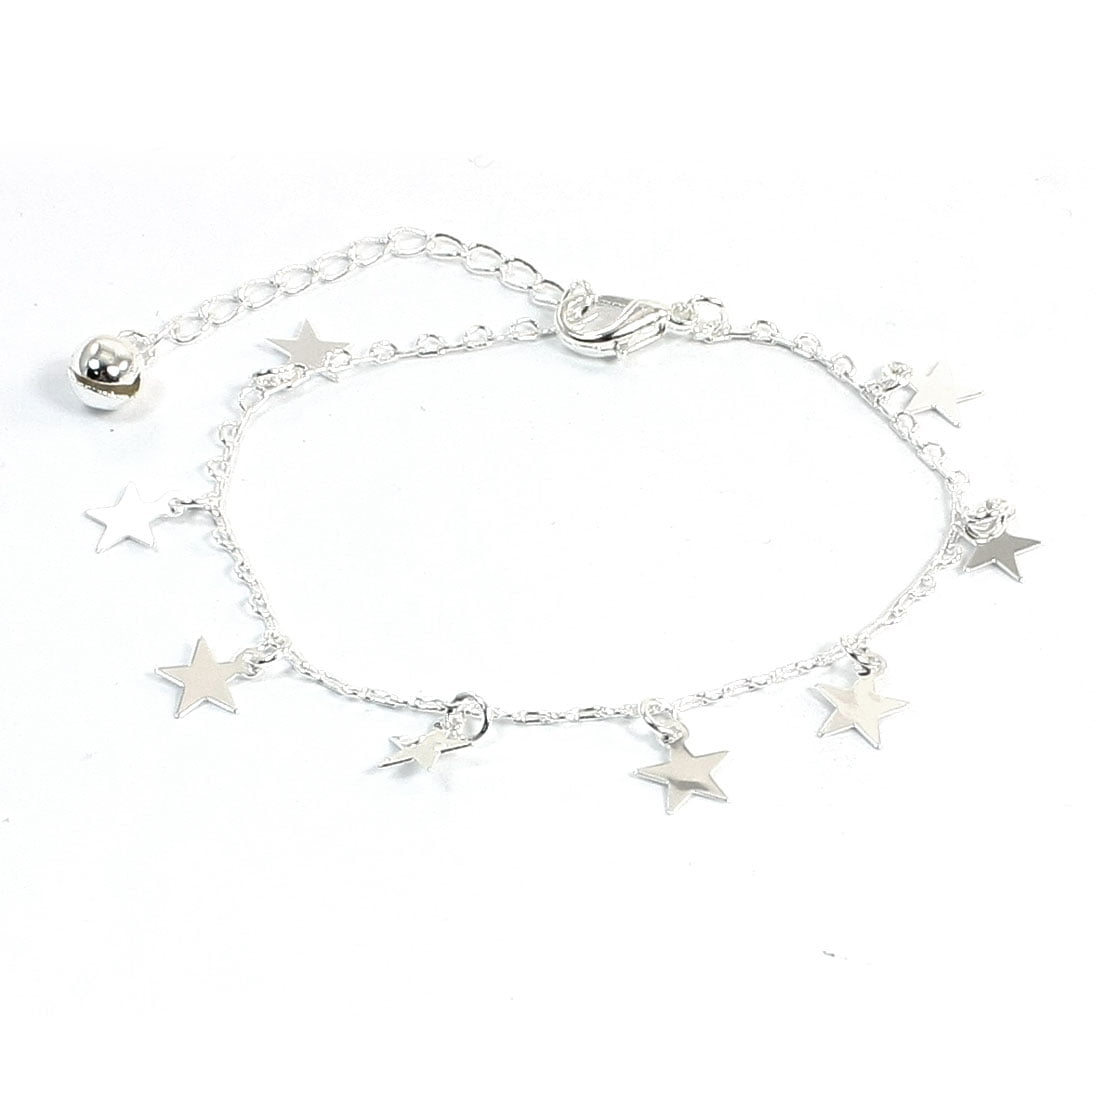 Five-Pointed Star Pendant Lobster Clasp Silver Tone Chain Bracelet ...